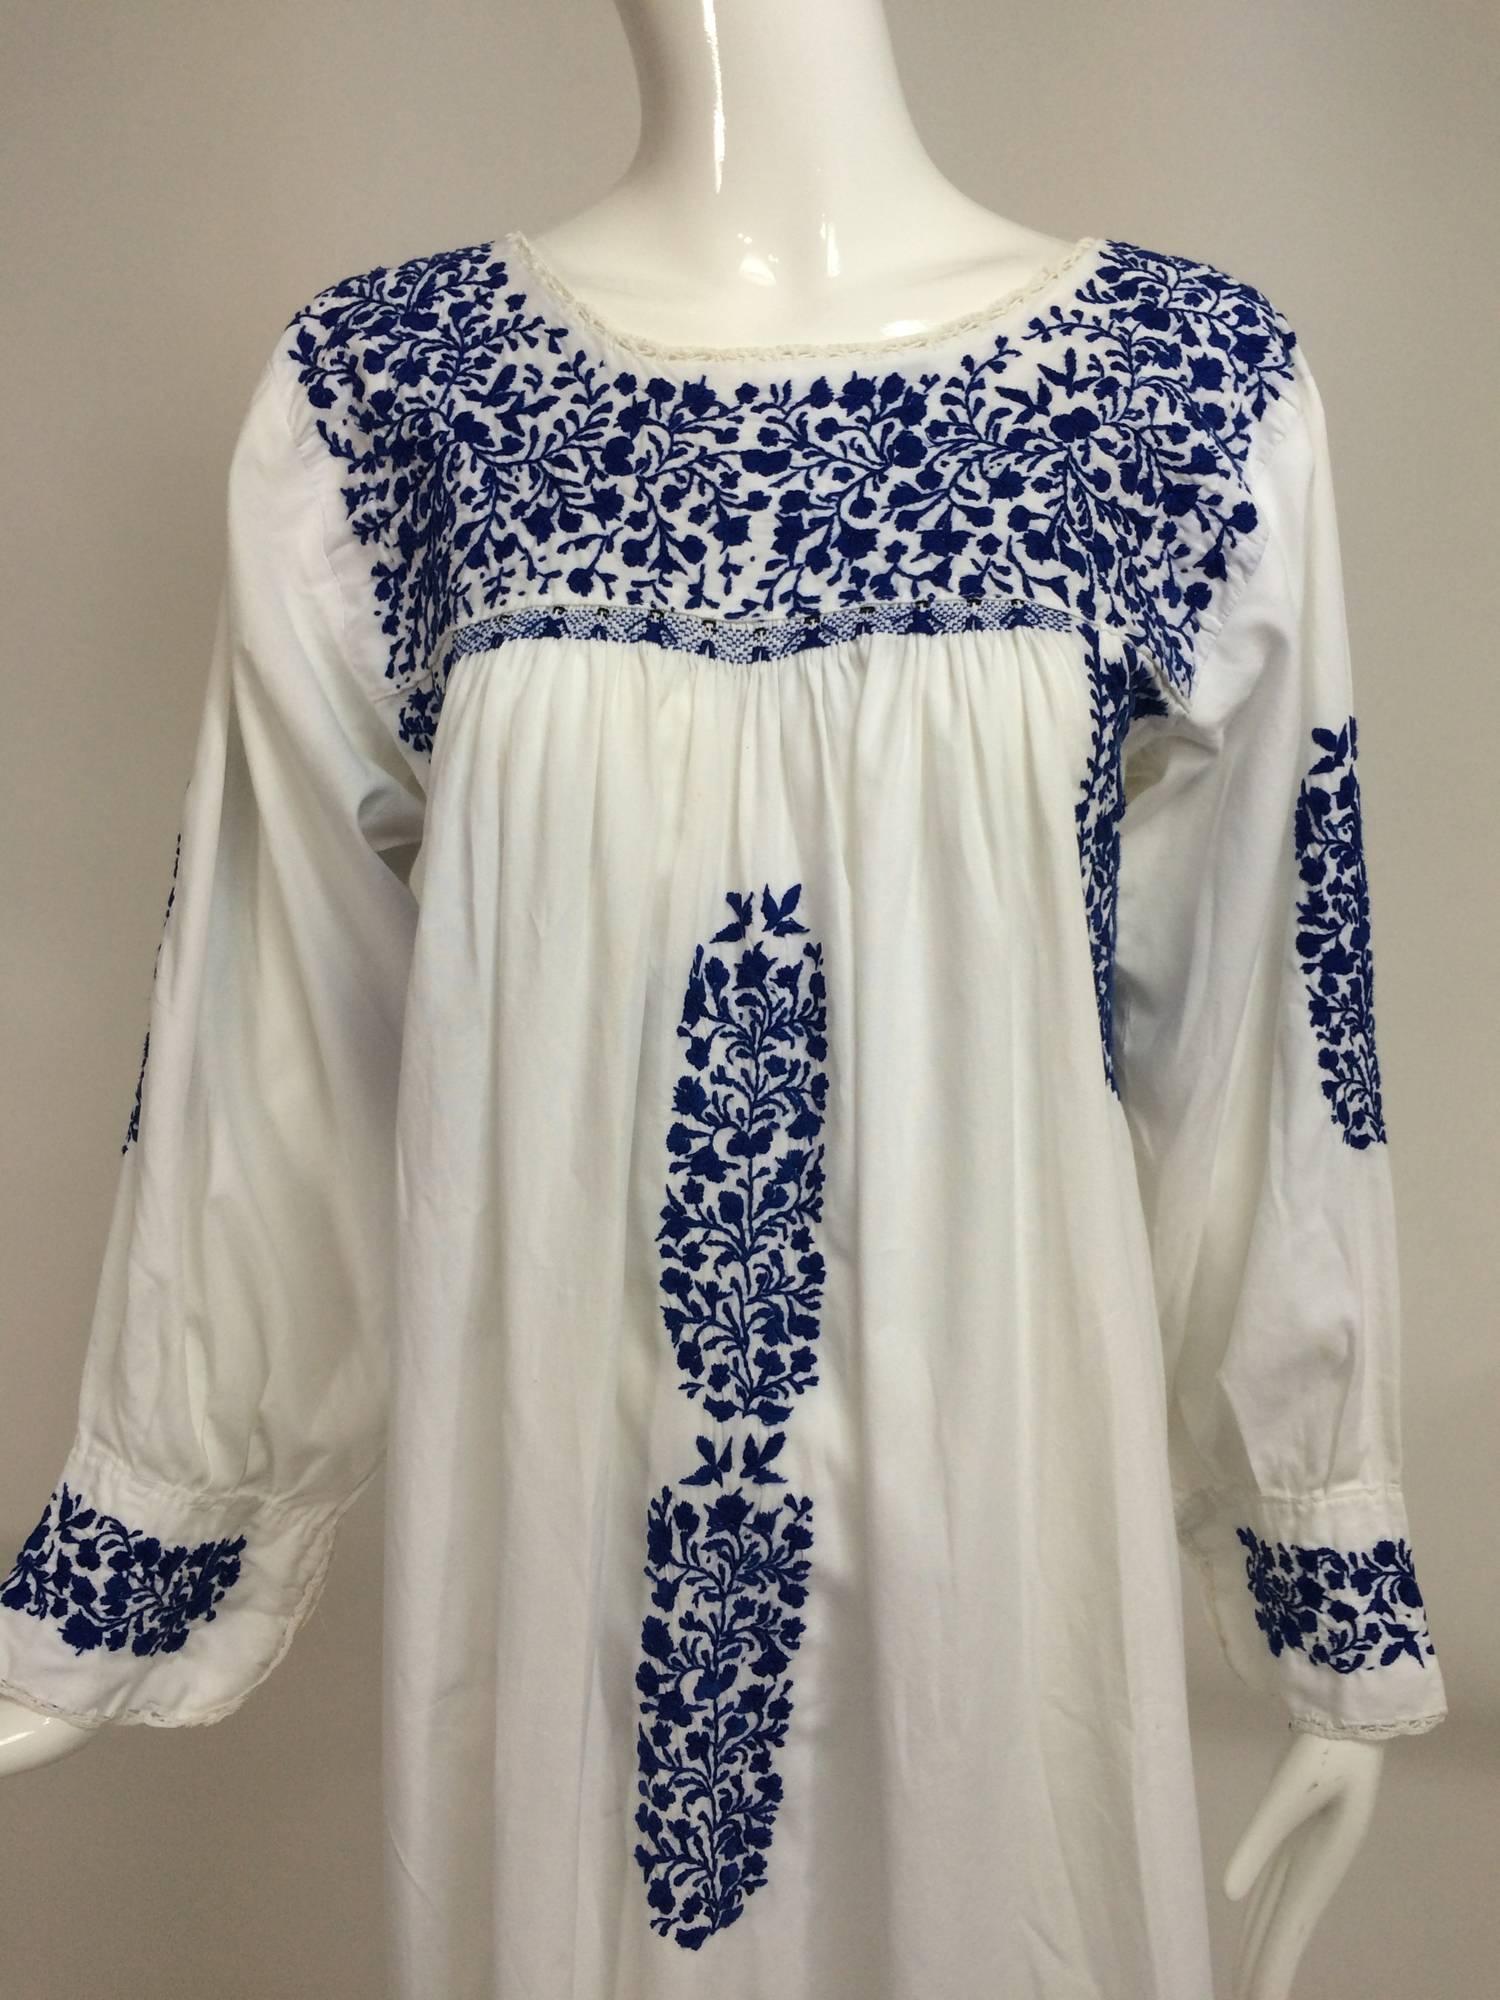 1960s blue and white cotton embroidered peasant dress from Oaxaca, Mexico an area know for it's indigenous cultures and native handicrafts...White cotton dress with long sleeves, the yoke, dress front, underarms and cuffs are hand embroidered in